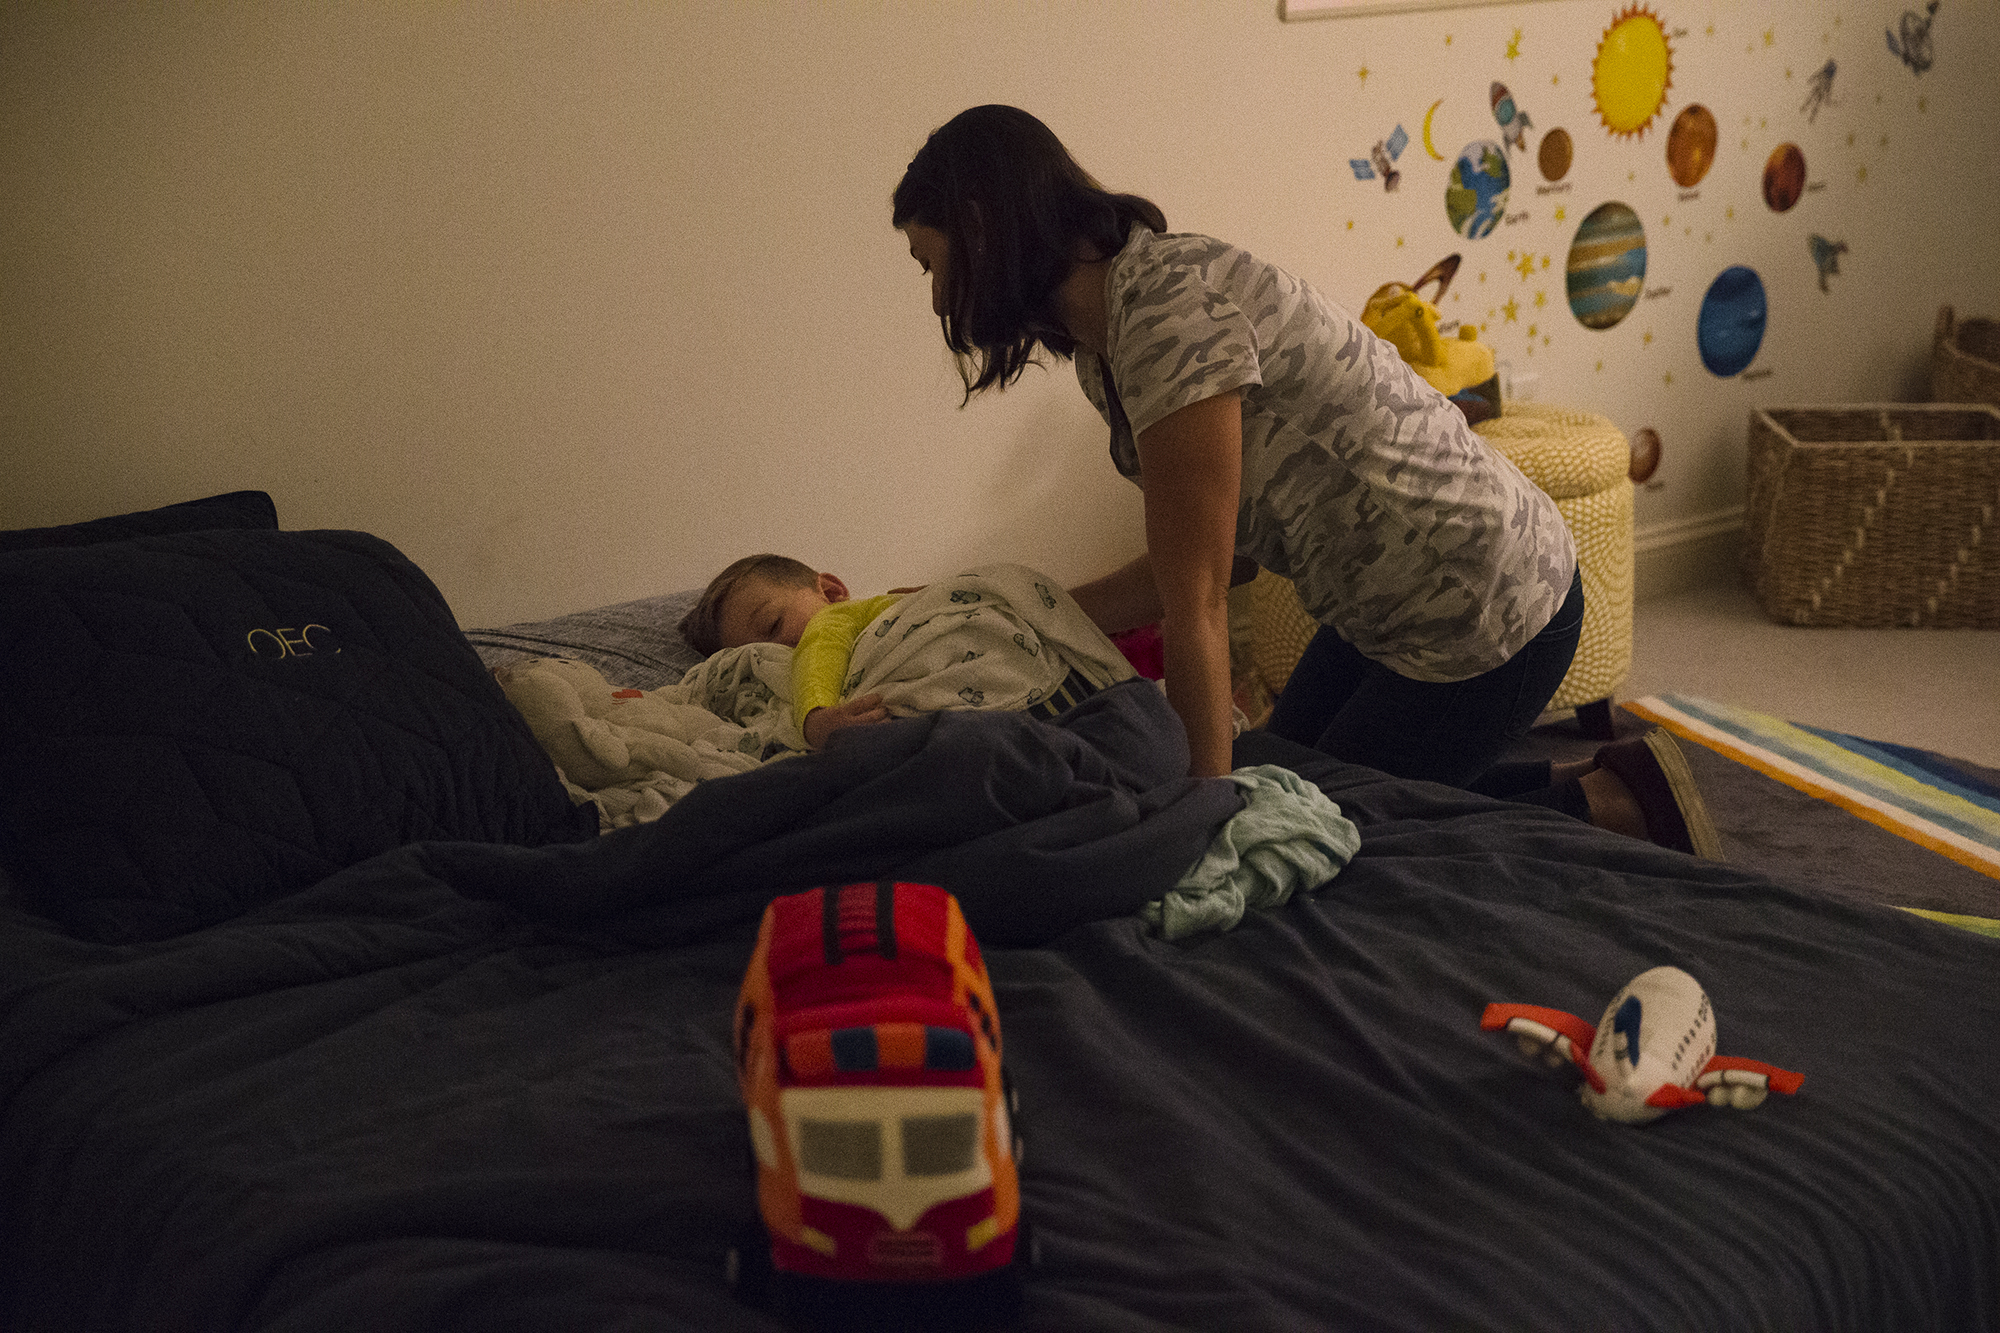 Photo: A mother leans over a bed to look at her sleeping child.